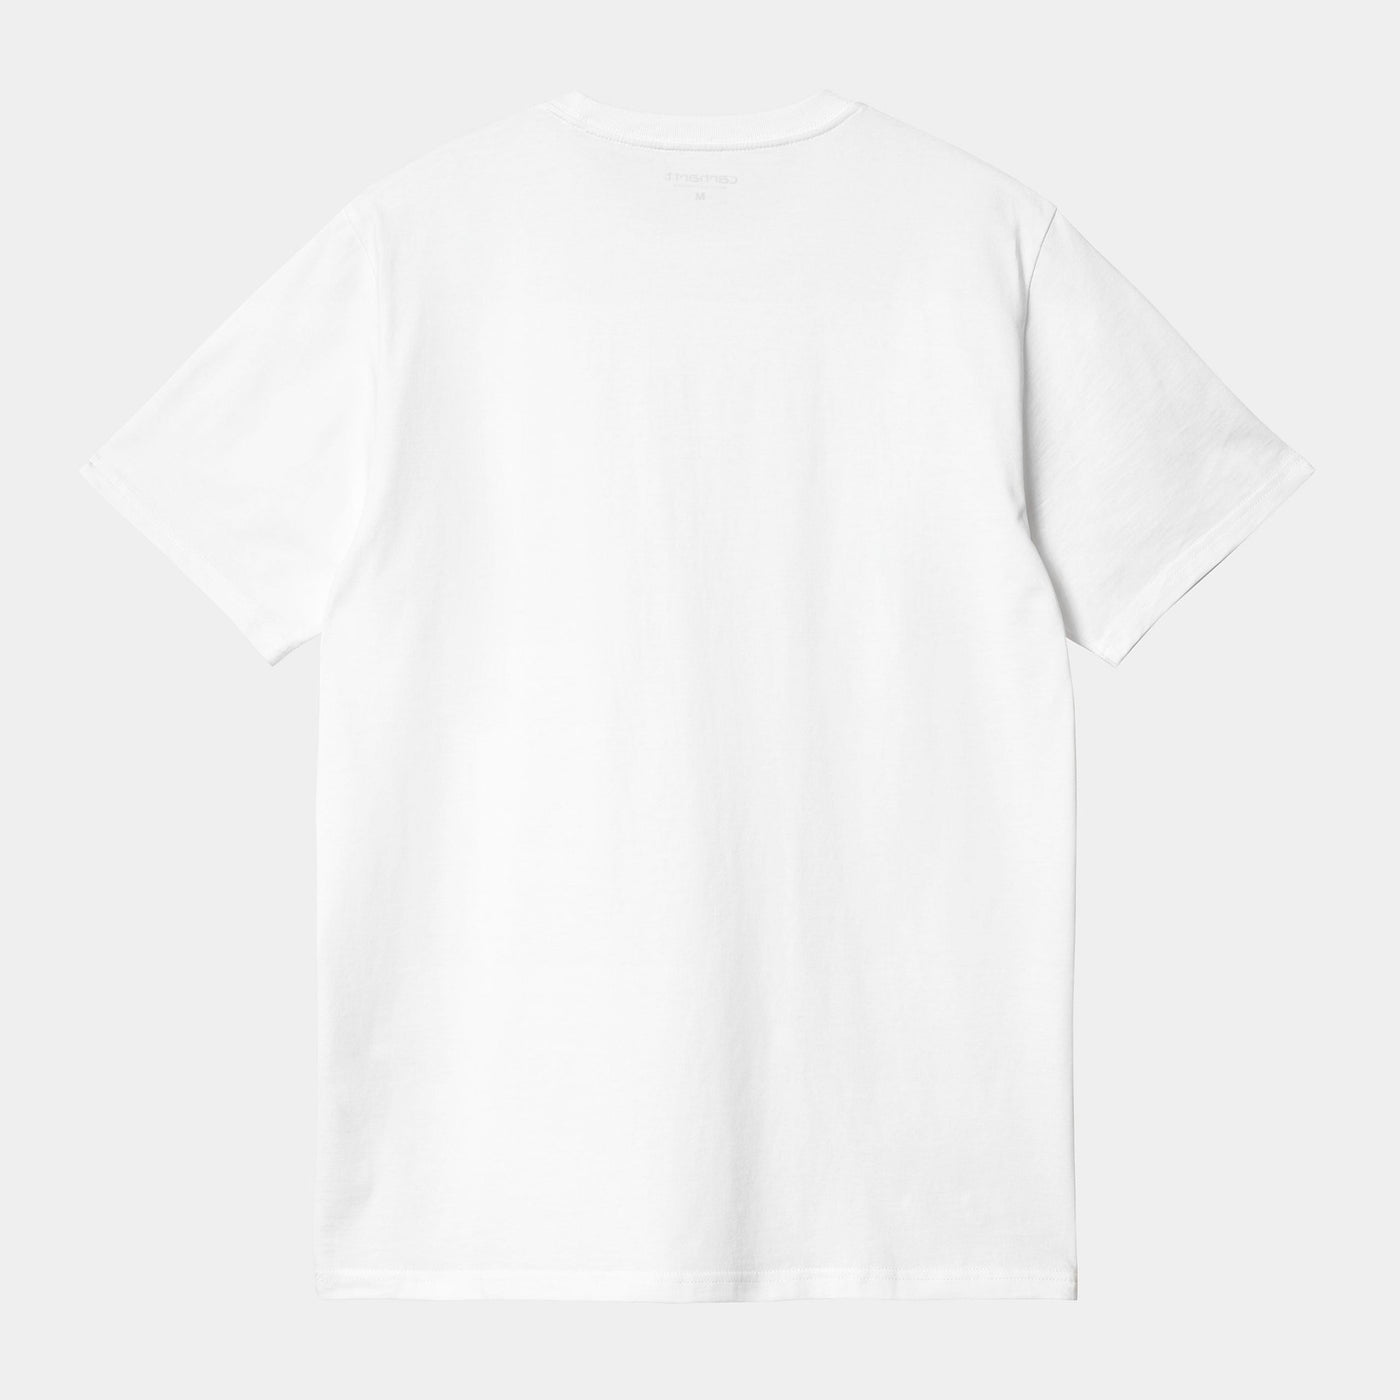 Carhartt WIP - S/S Pocket T-Shirt White - Lothaire